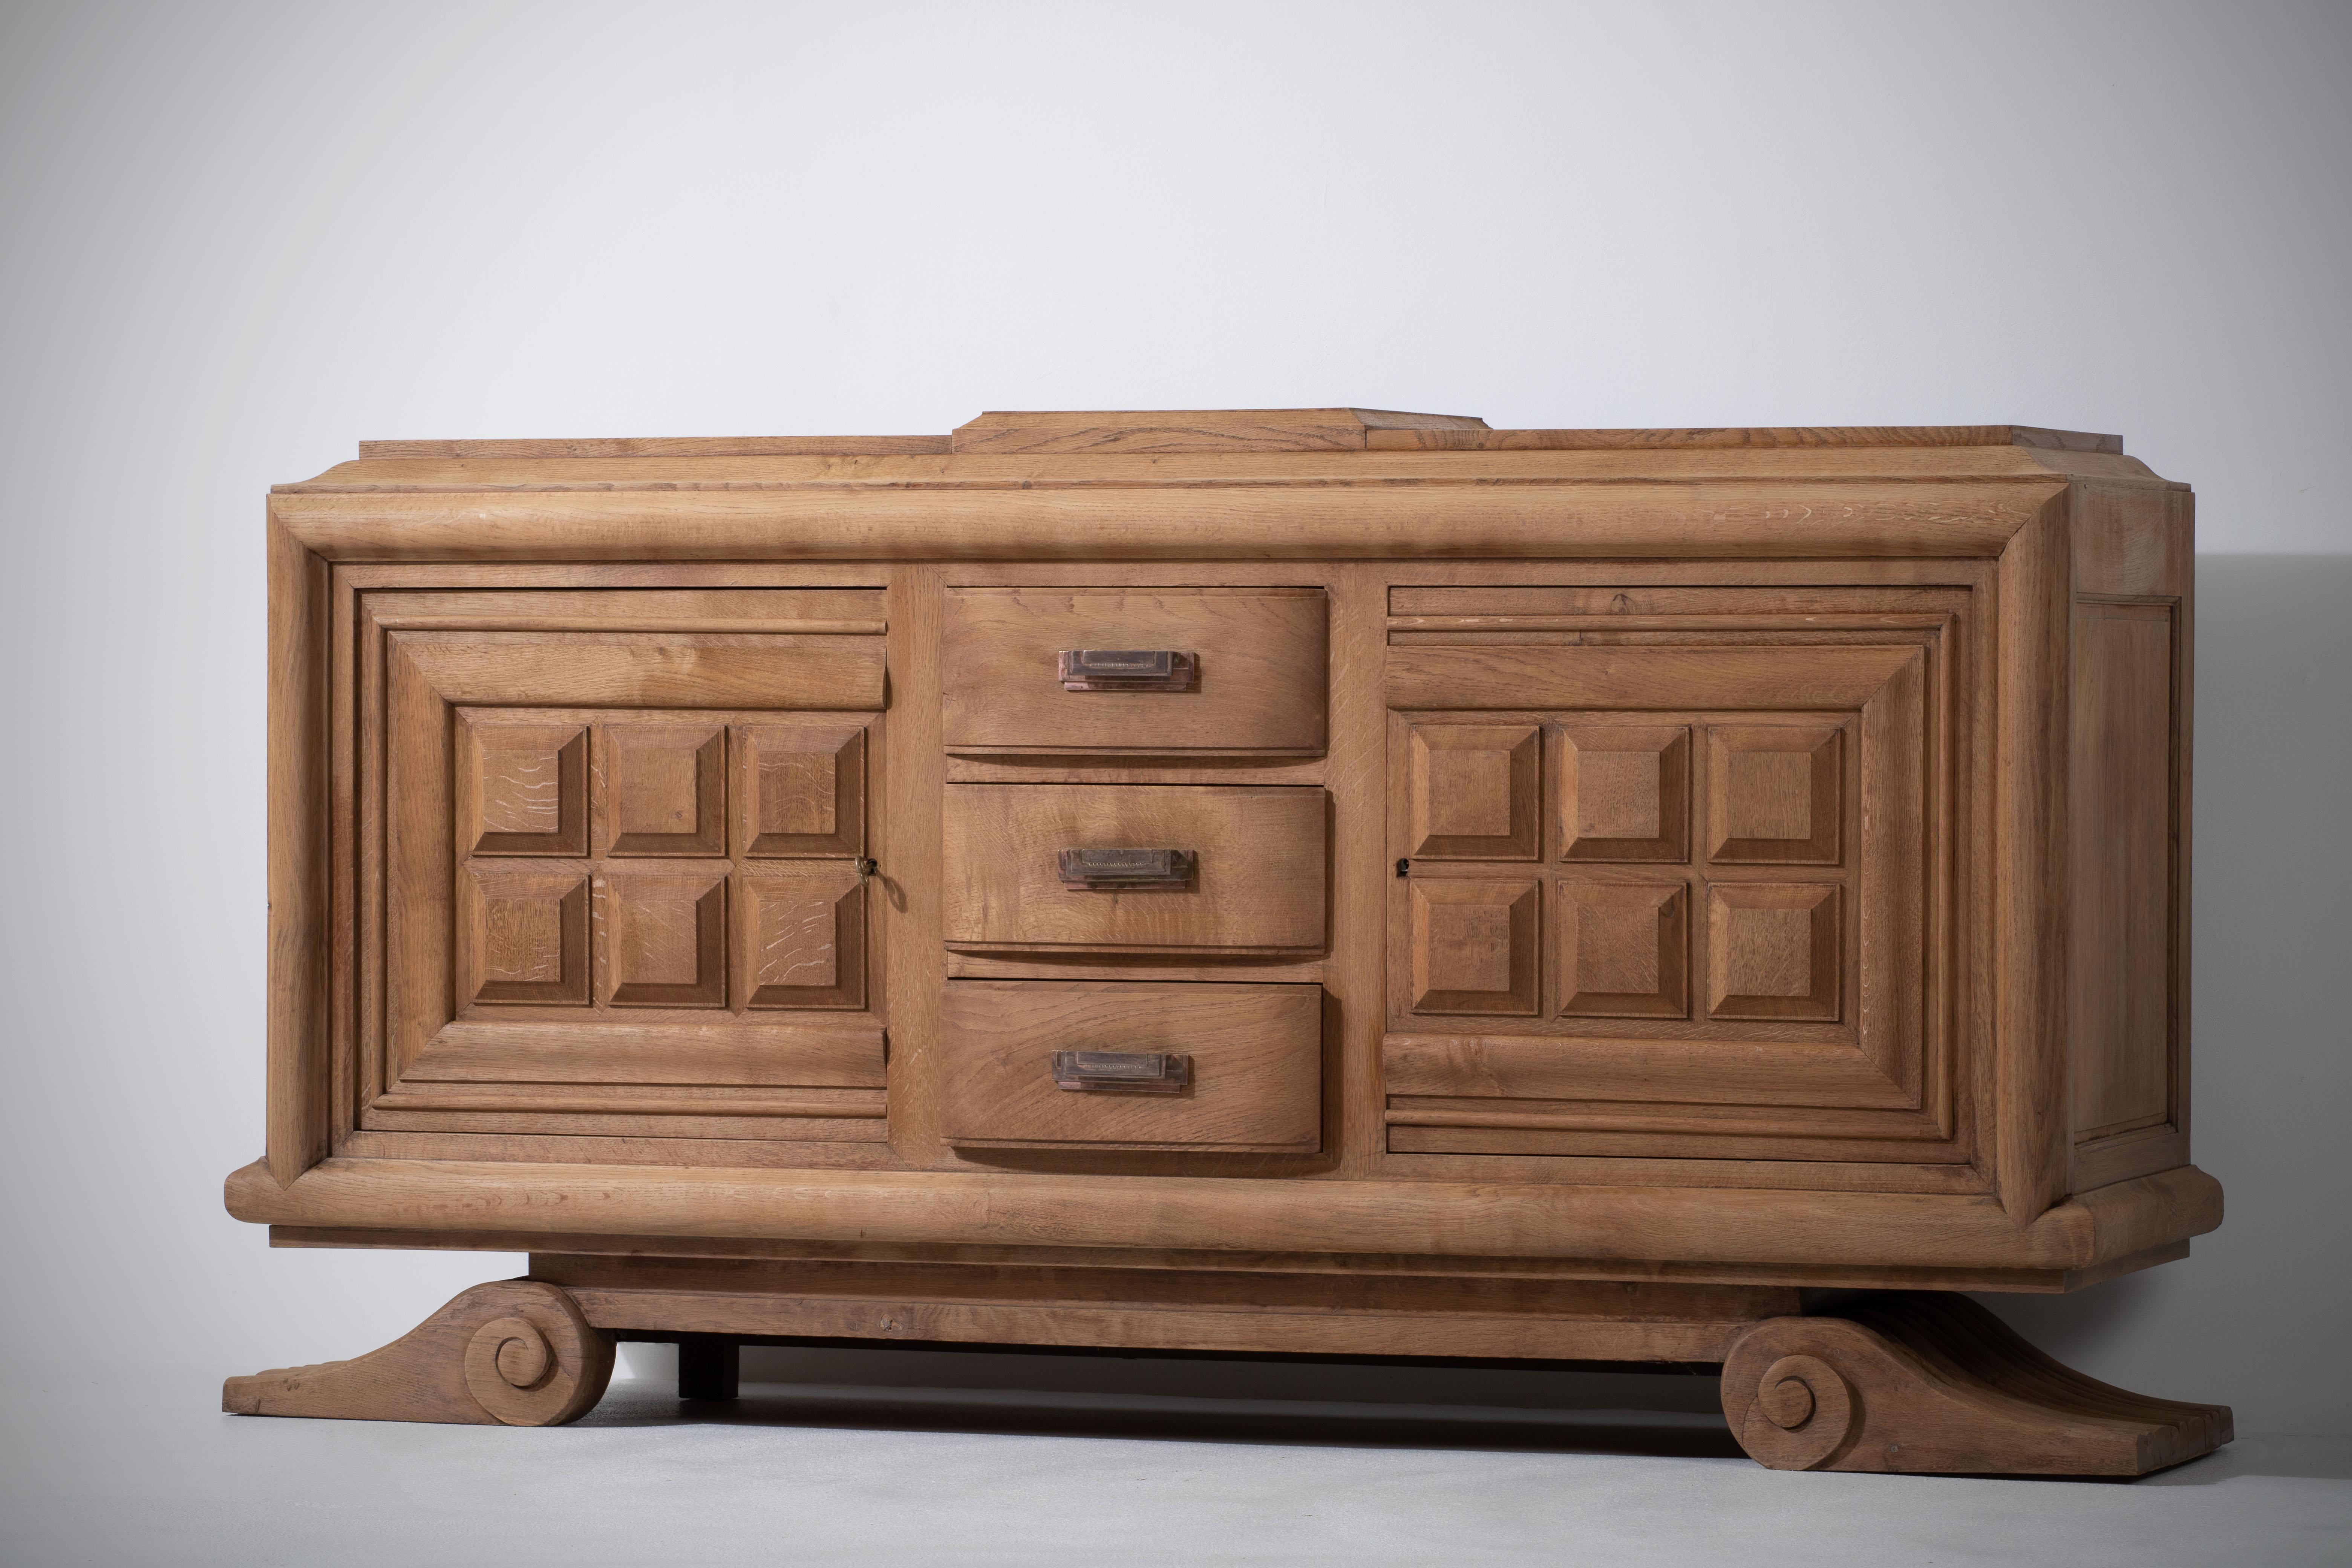 A large sideboard/credenza attributed to Charles Dudouyt. 
France, circa 1940s.
Consists of two storage compartments and a central drawers column. 
The sideboard is in good original condition, with minor wear consistent with age and use.
A truly